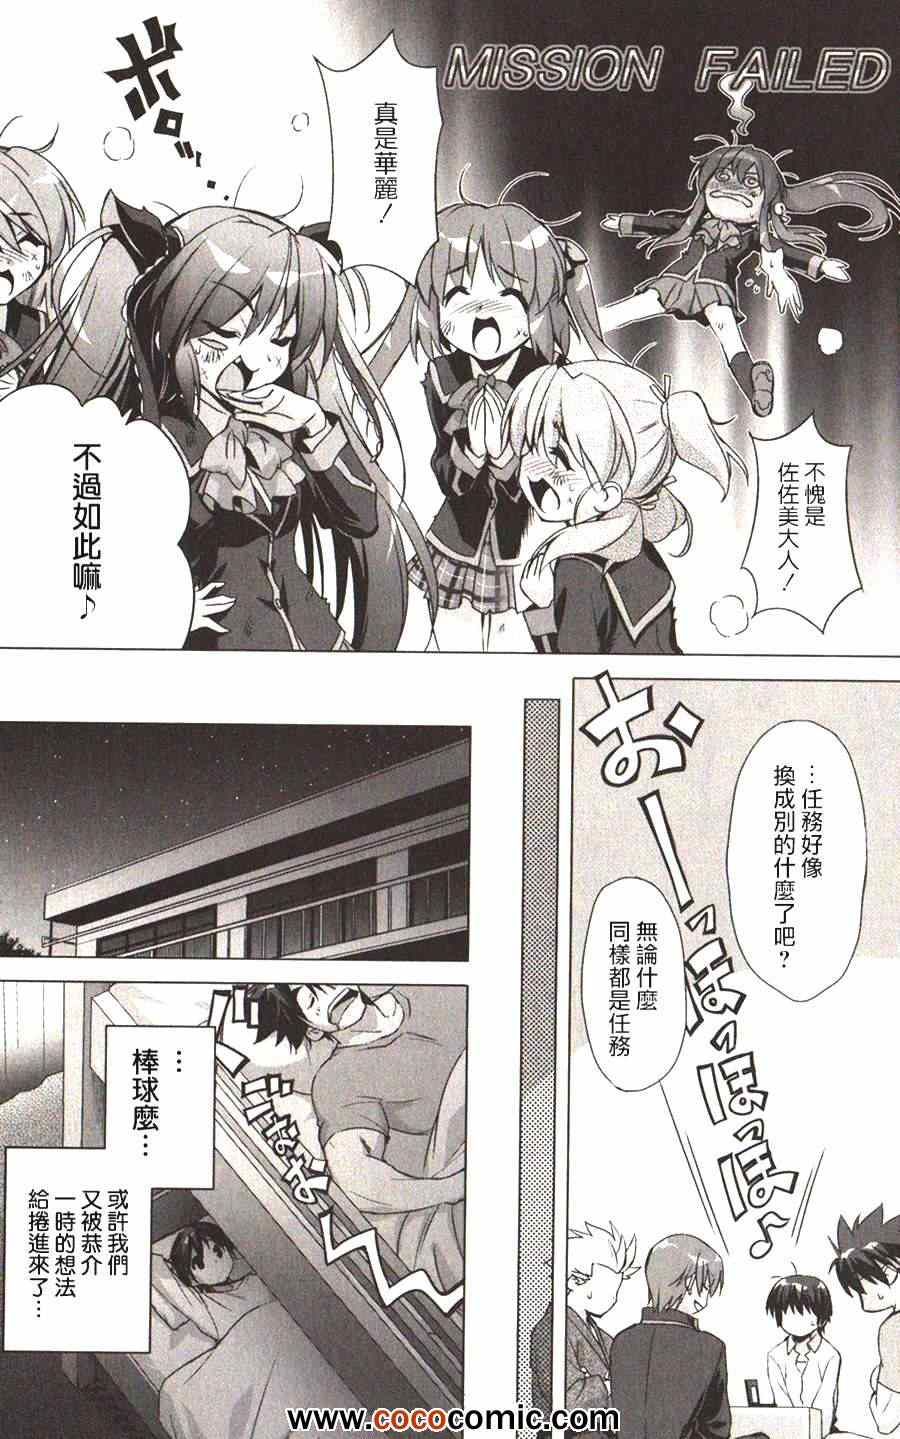 《Little Busters! End of Refrain》漫画 End of Refrain 002集